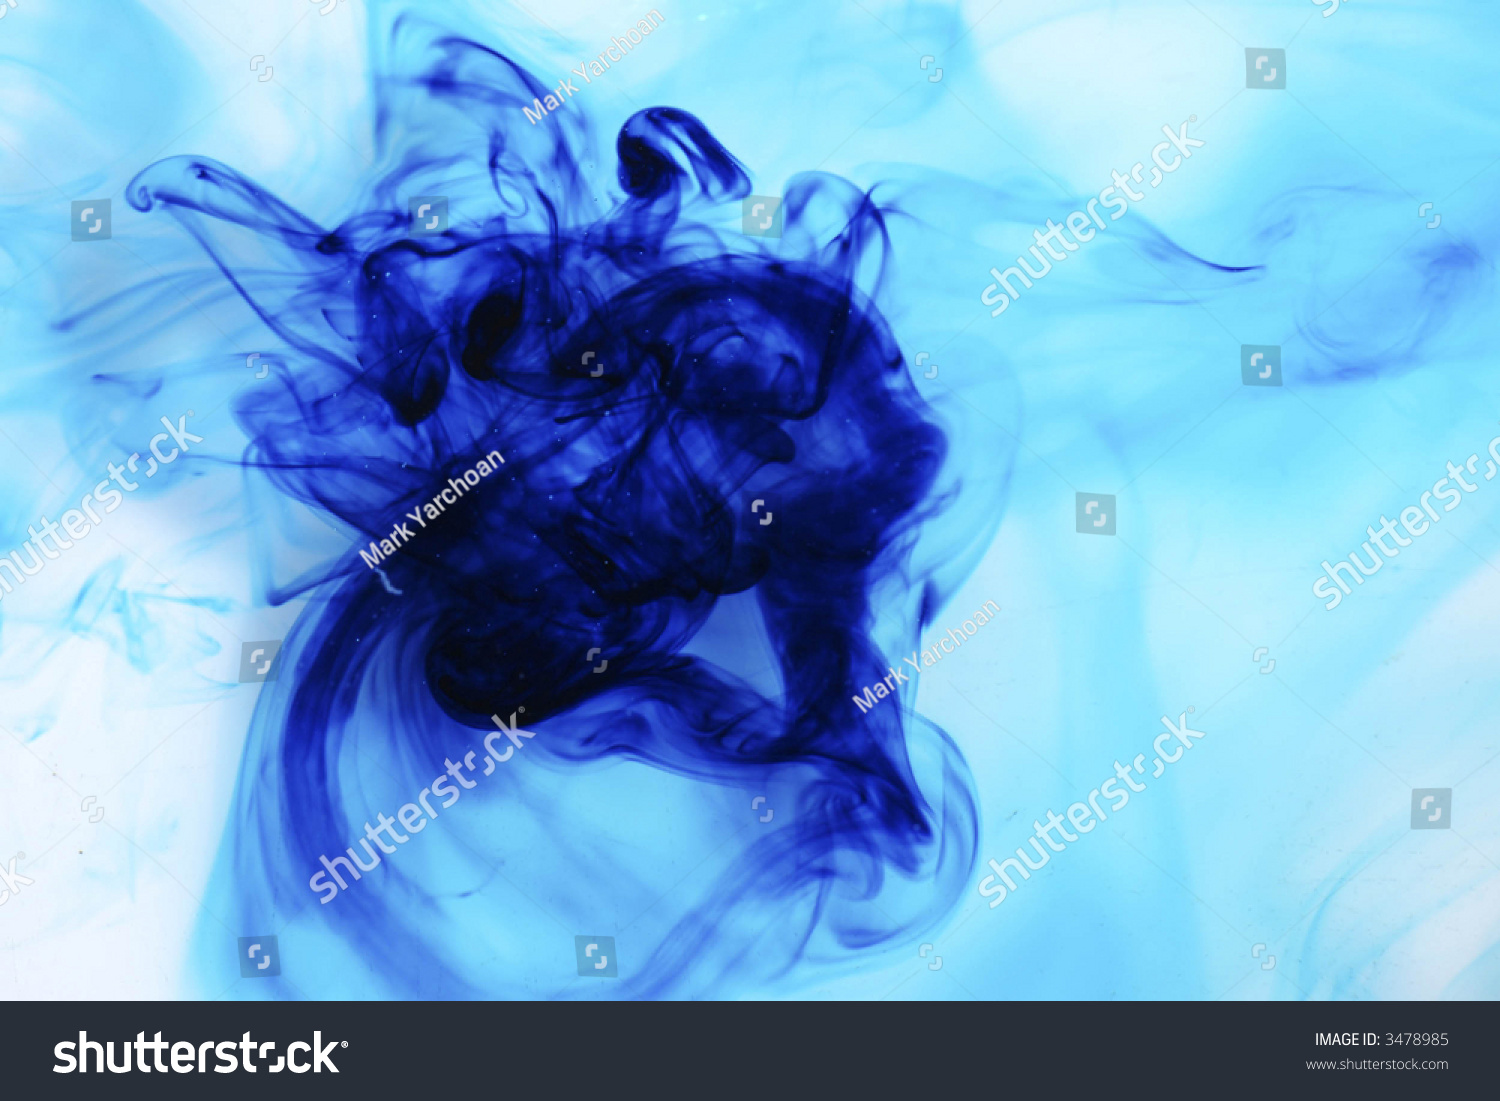 Ink Diffusion Stock Photo 3478985 : Shutterstock